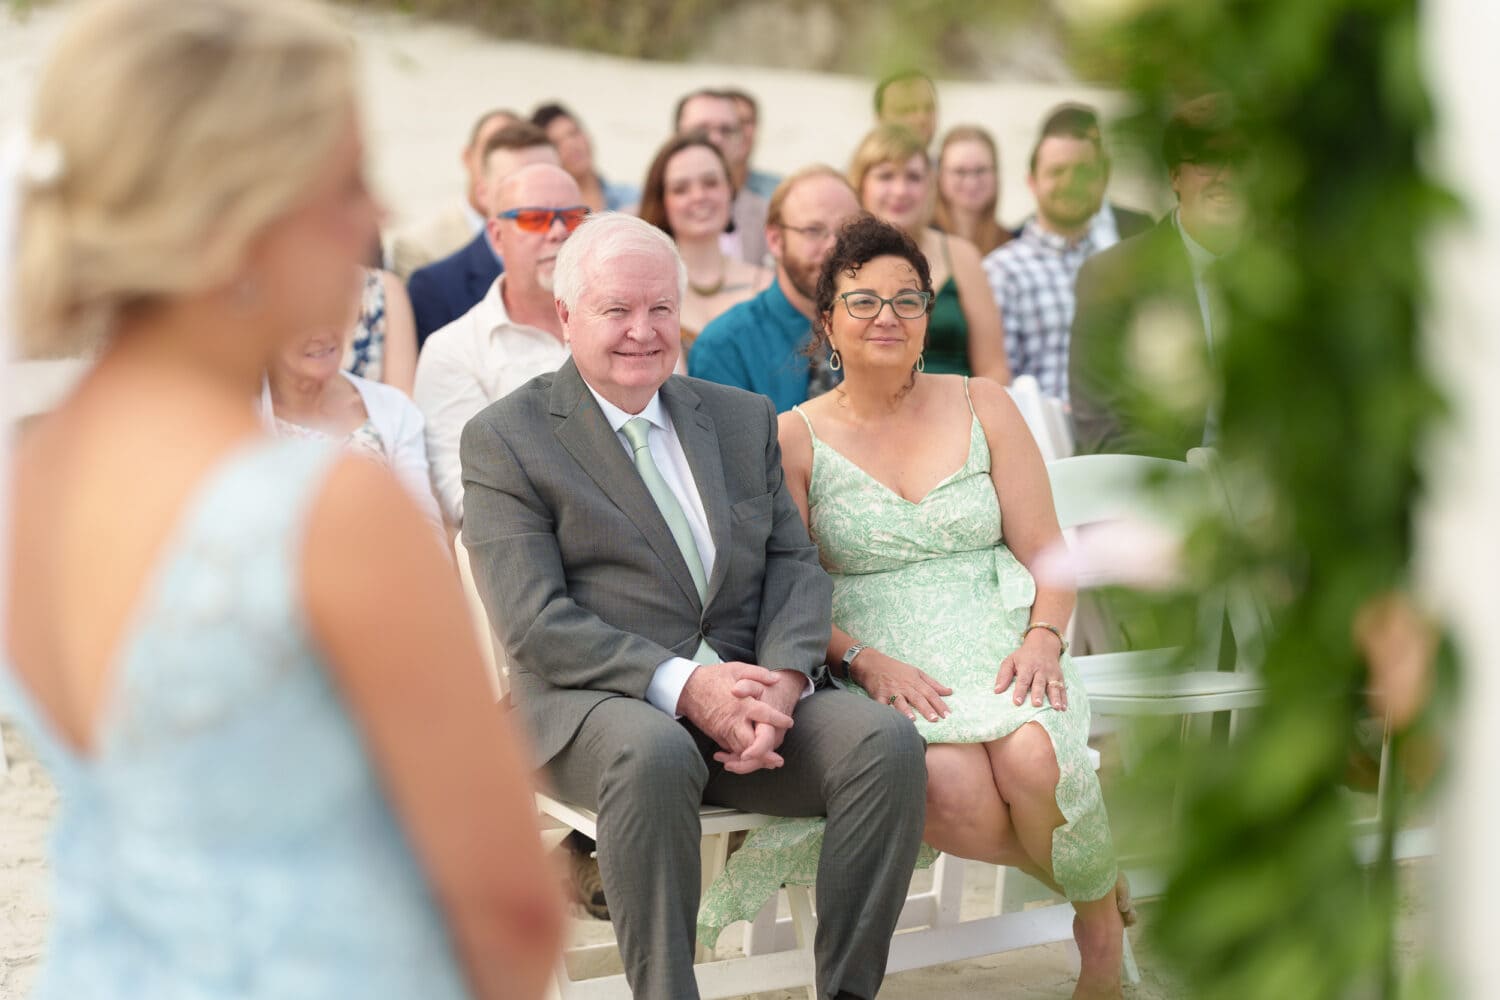 Pictures of the parents during the ceremony - Hilton Myrtle Beach Resort